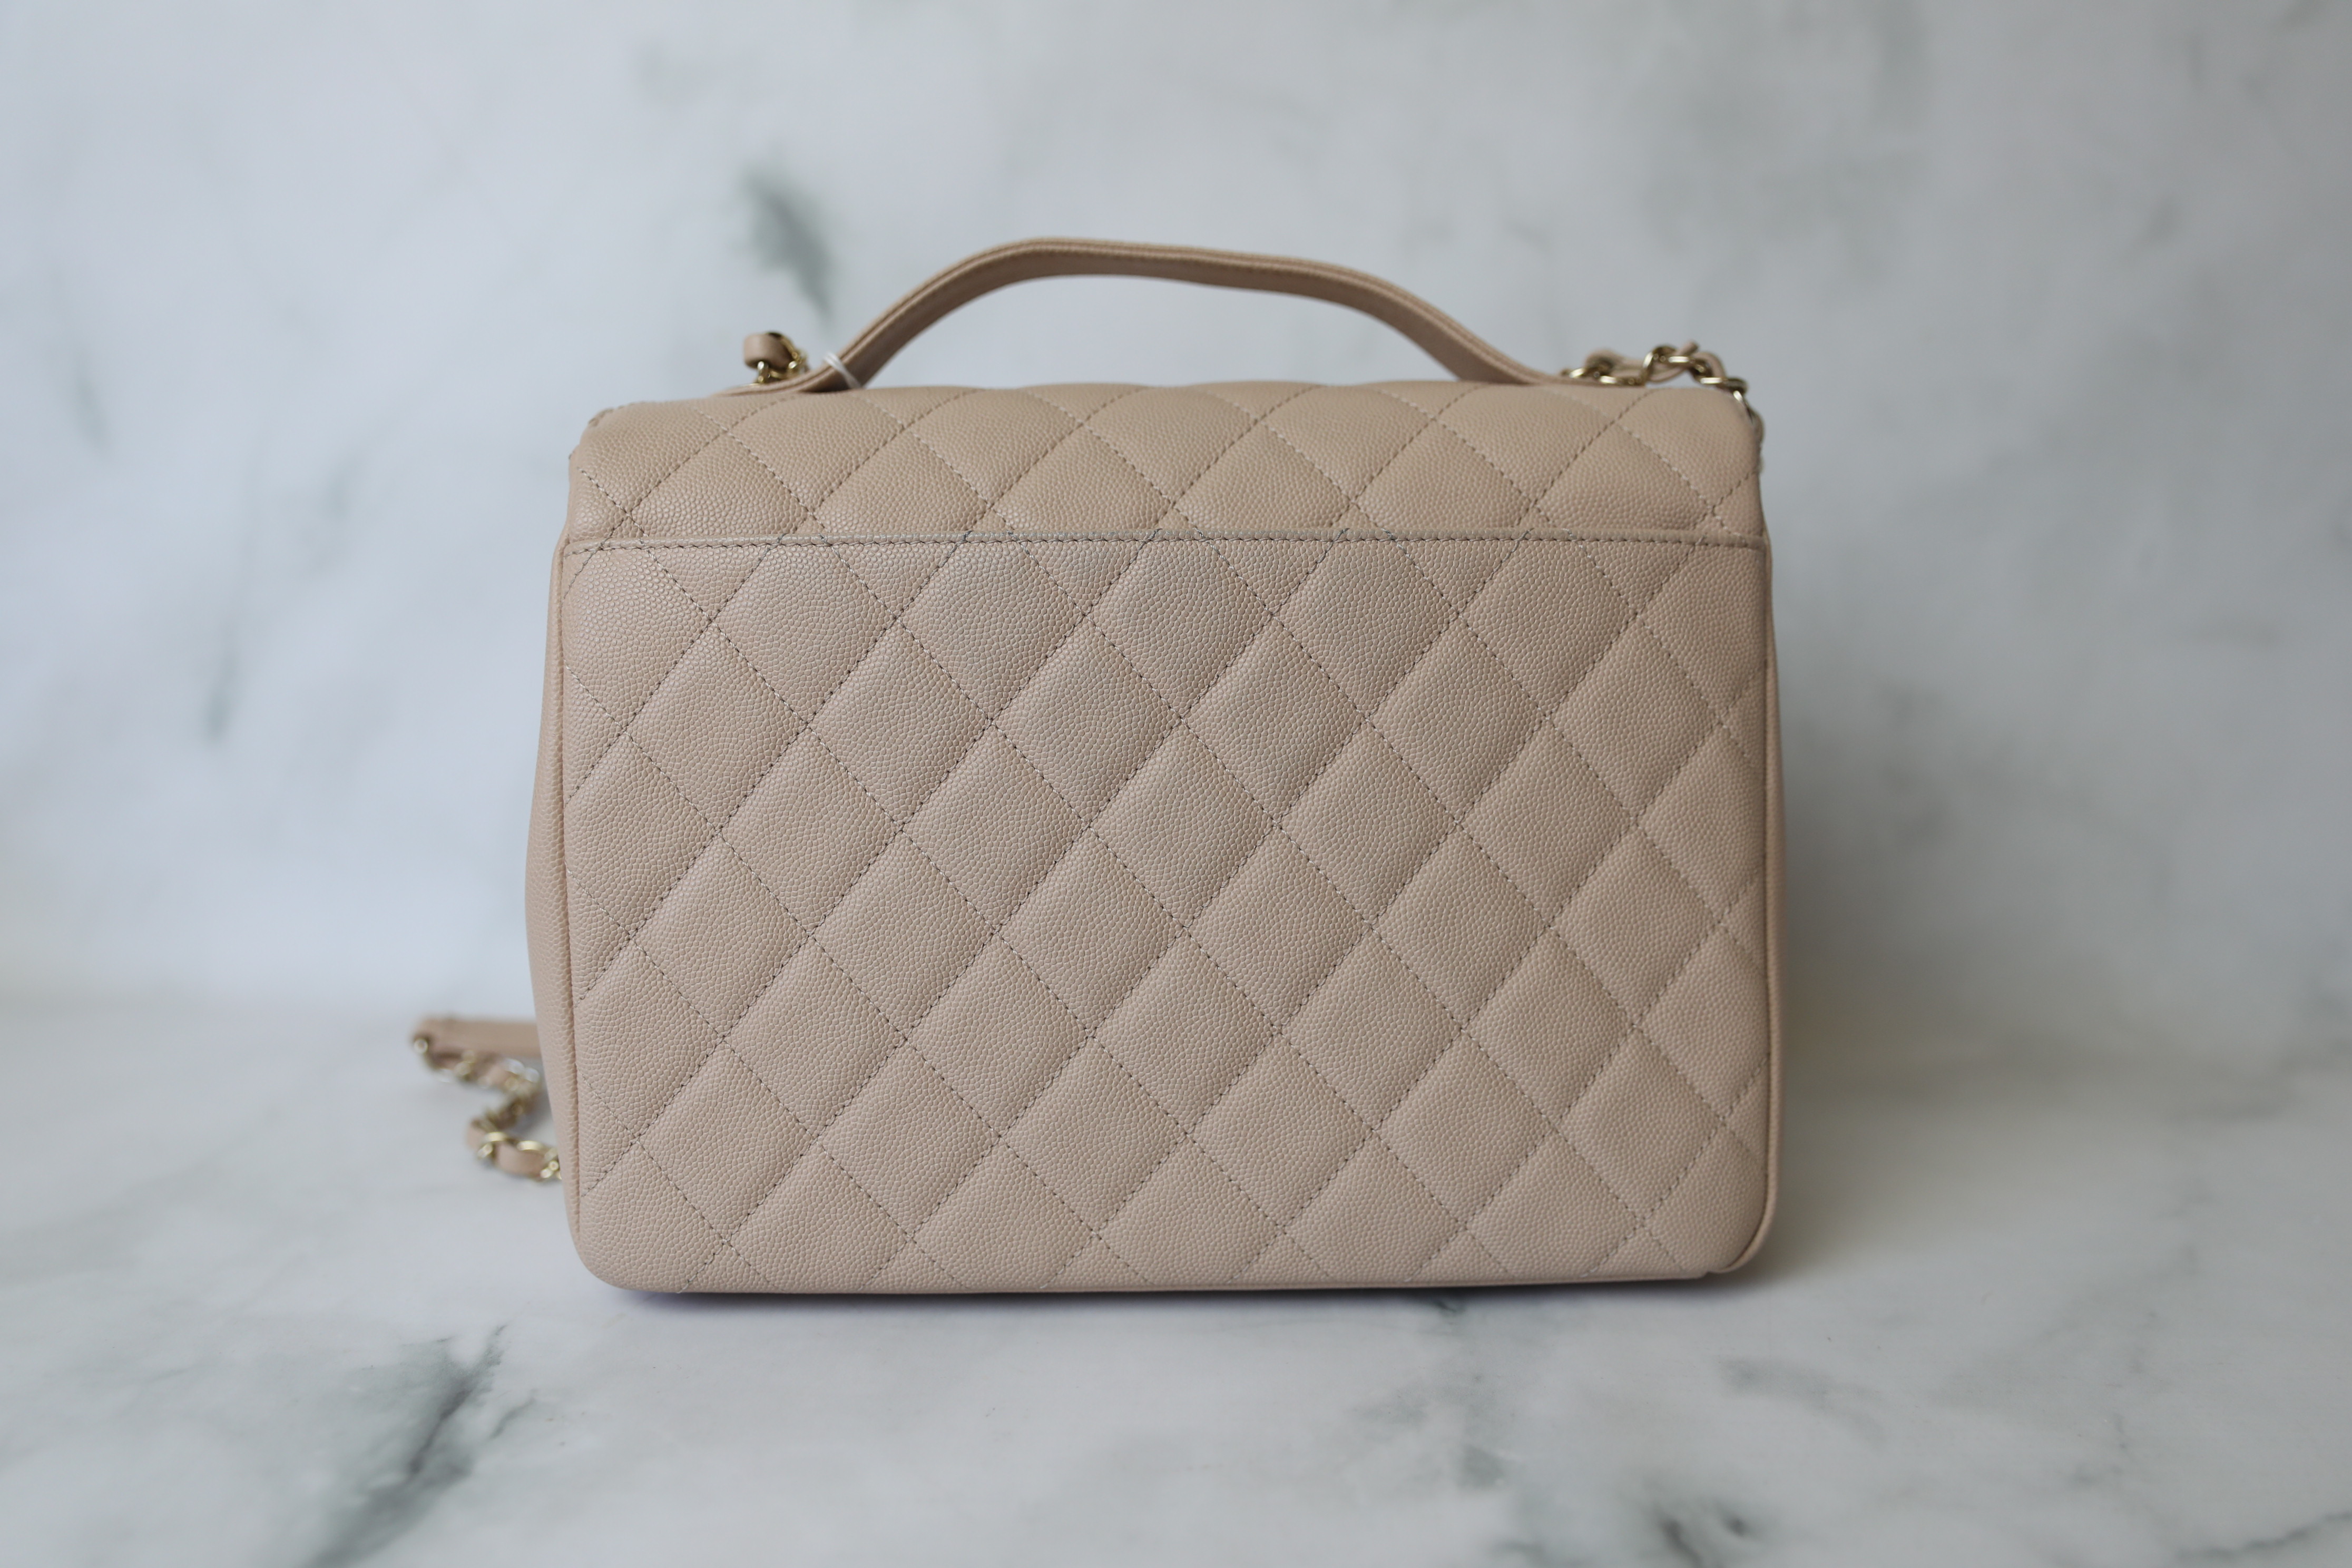 Chanel Business Affinity Large, Beige Caviar with Gold Hardware, Preowned  in Dustbag WA001